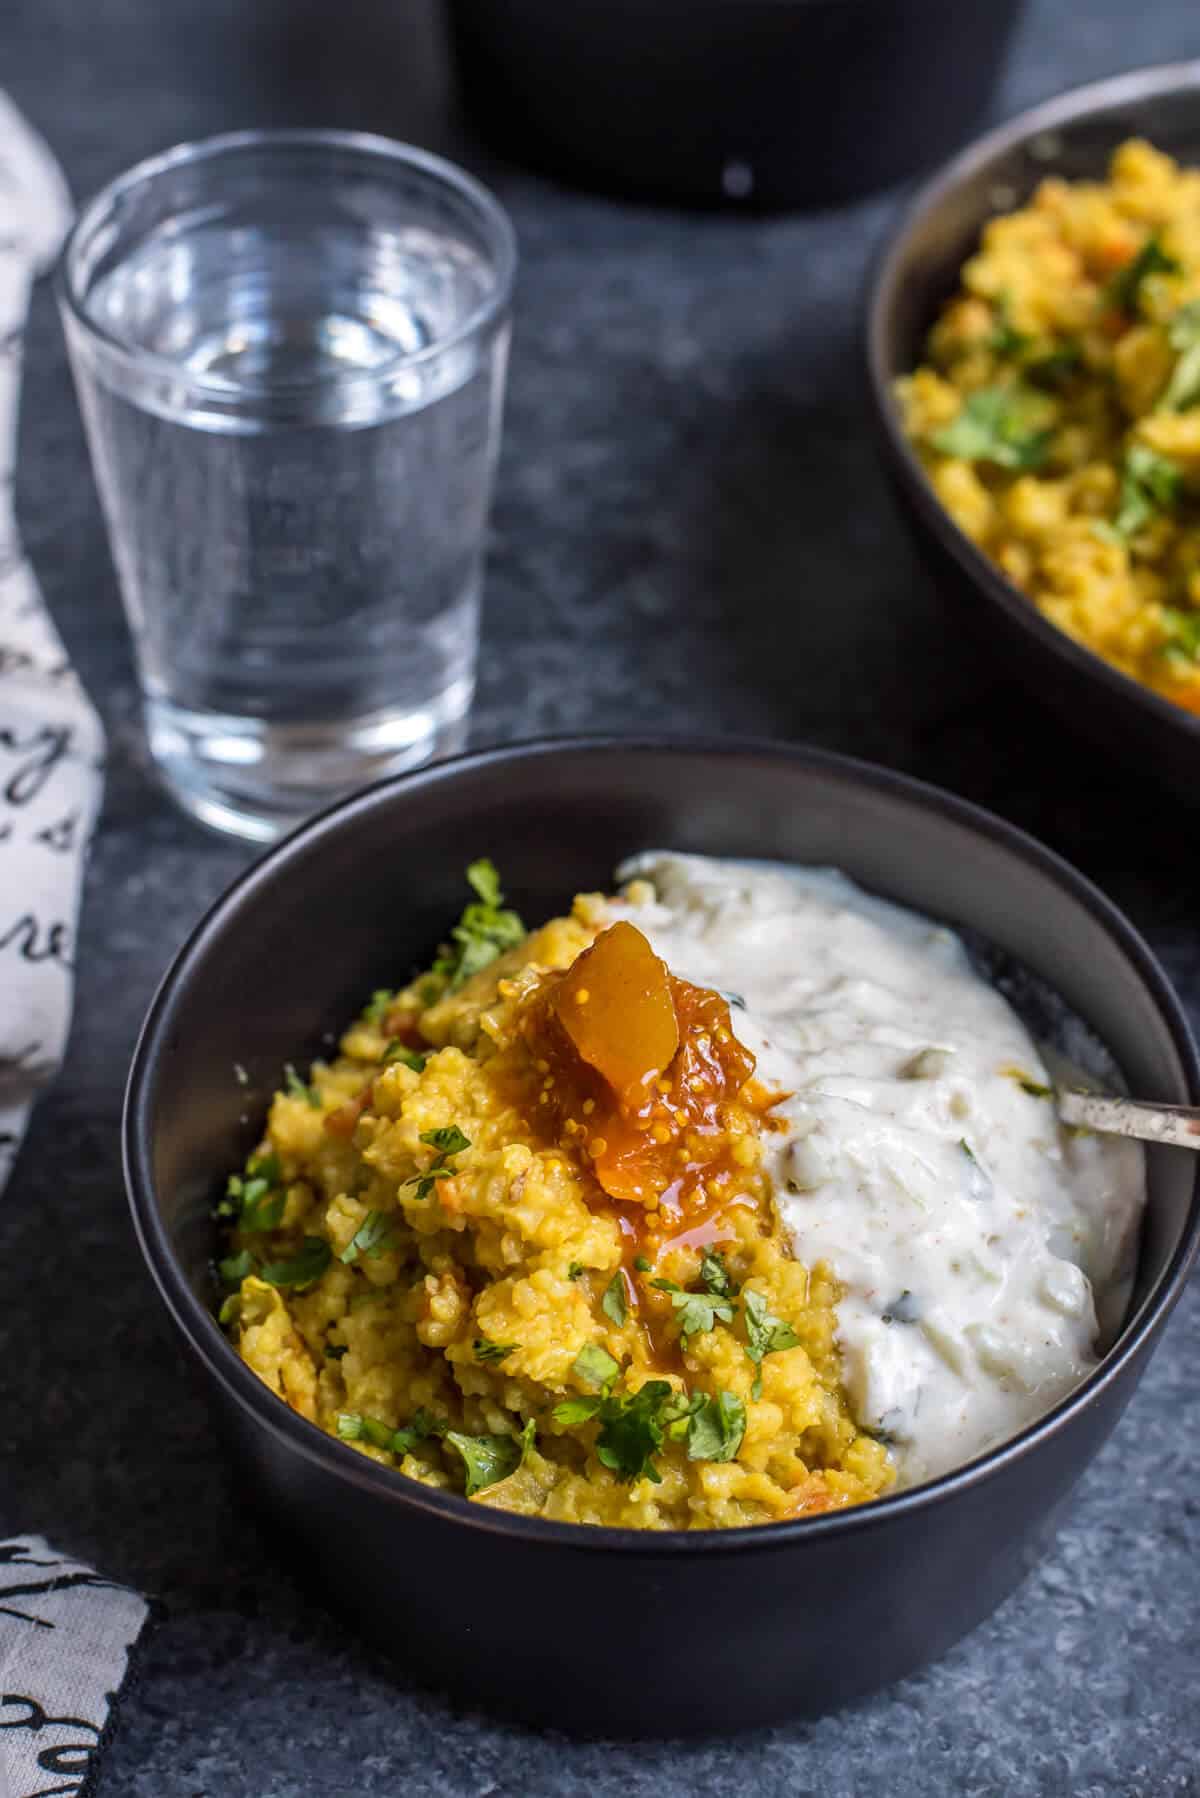 Masala khichdi in a bowl served with water on the side.